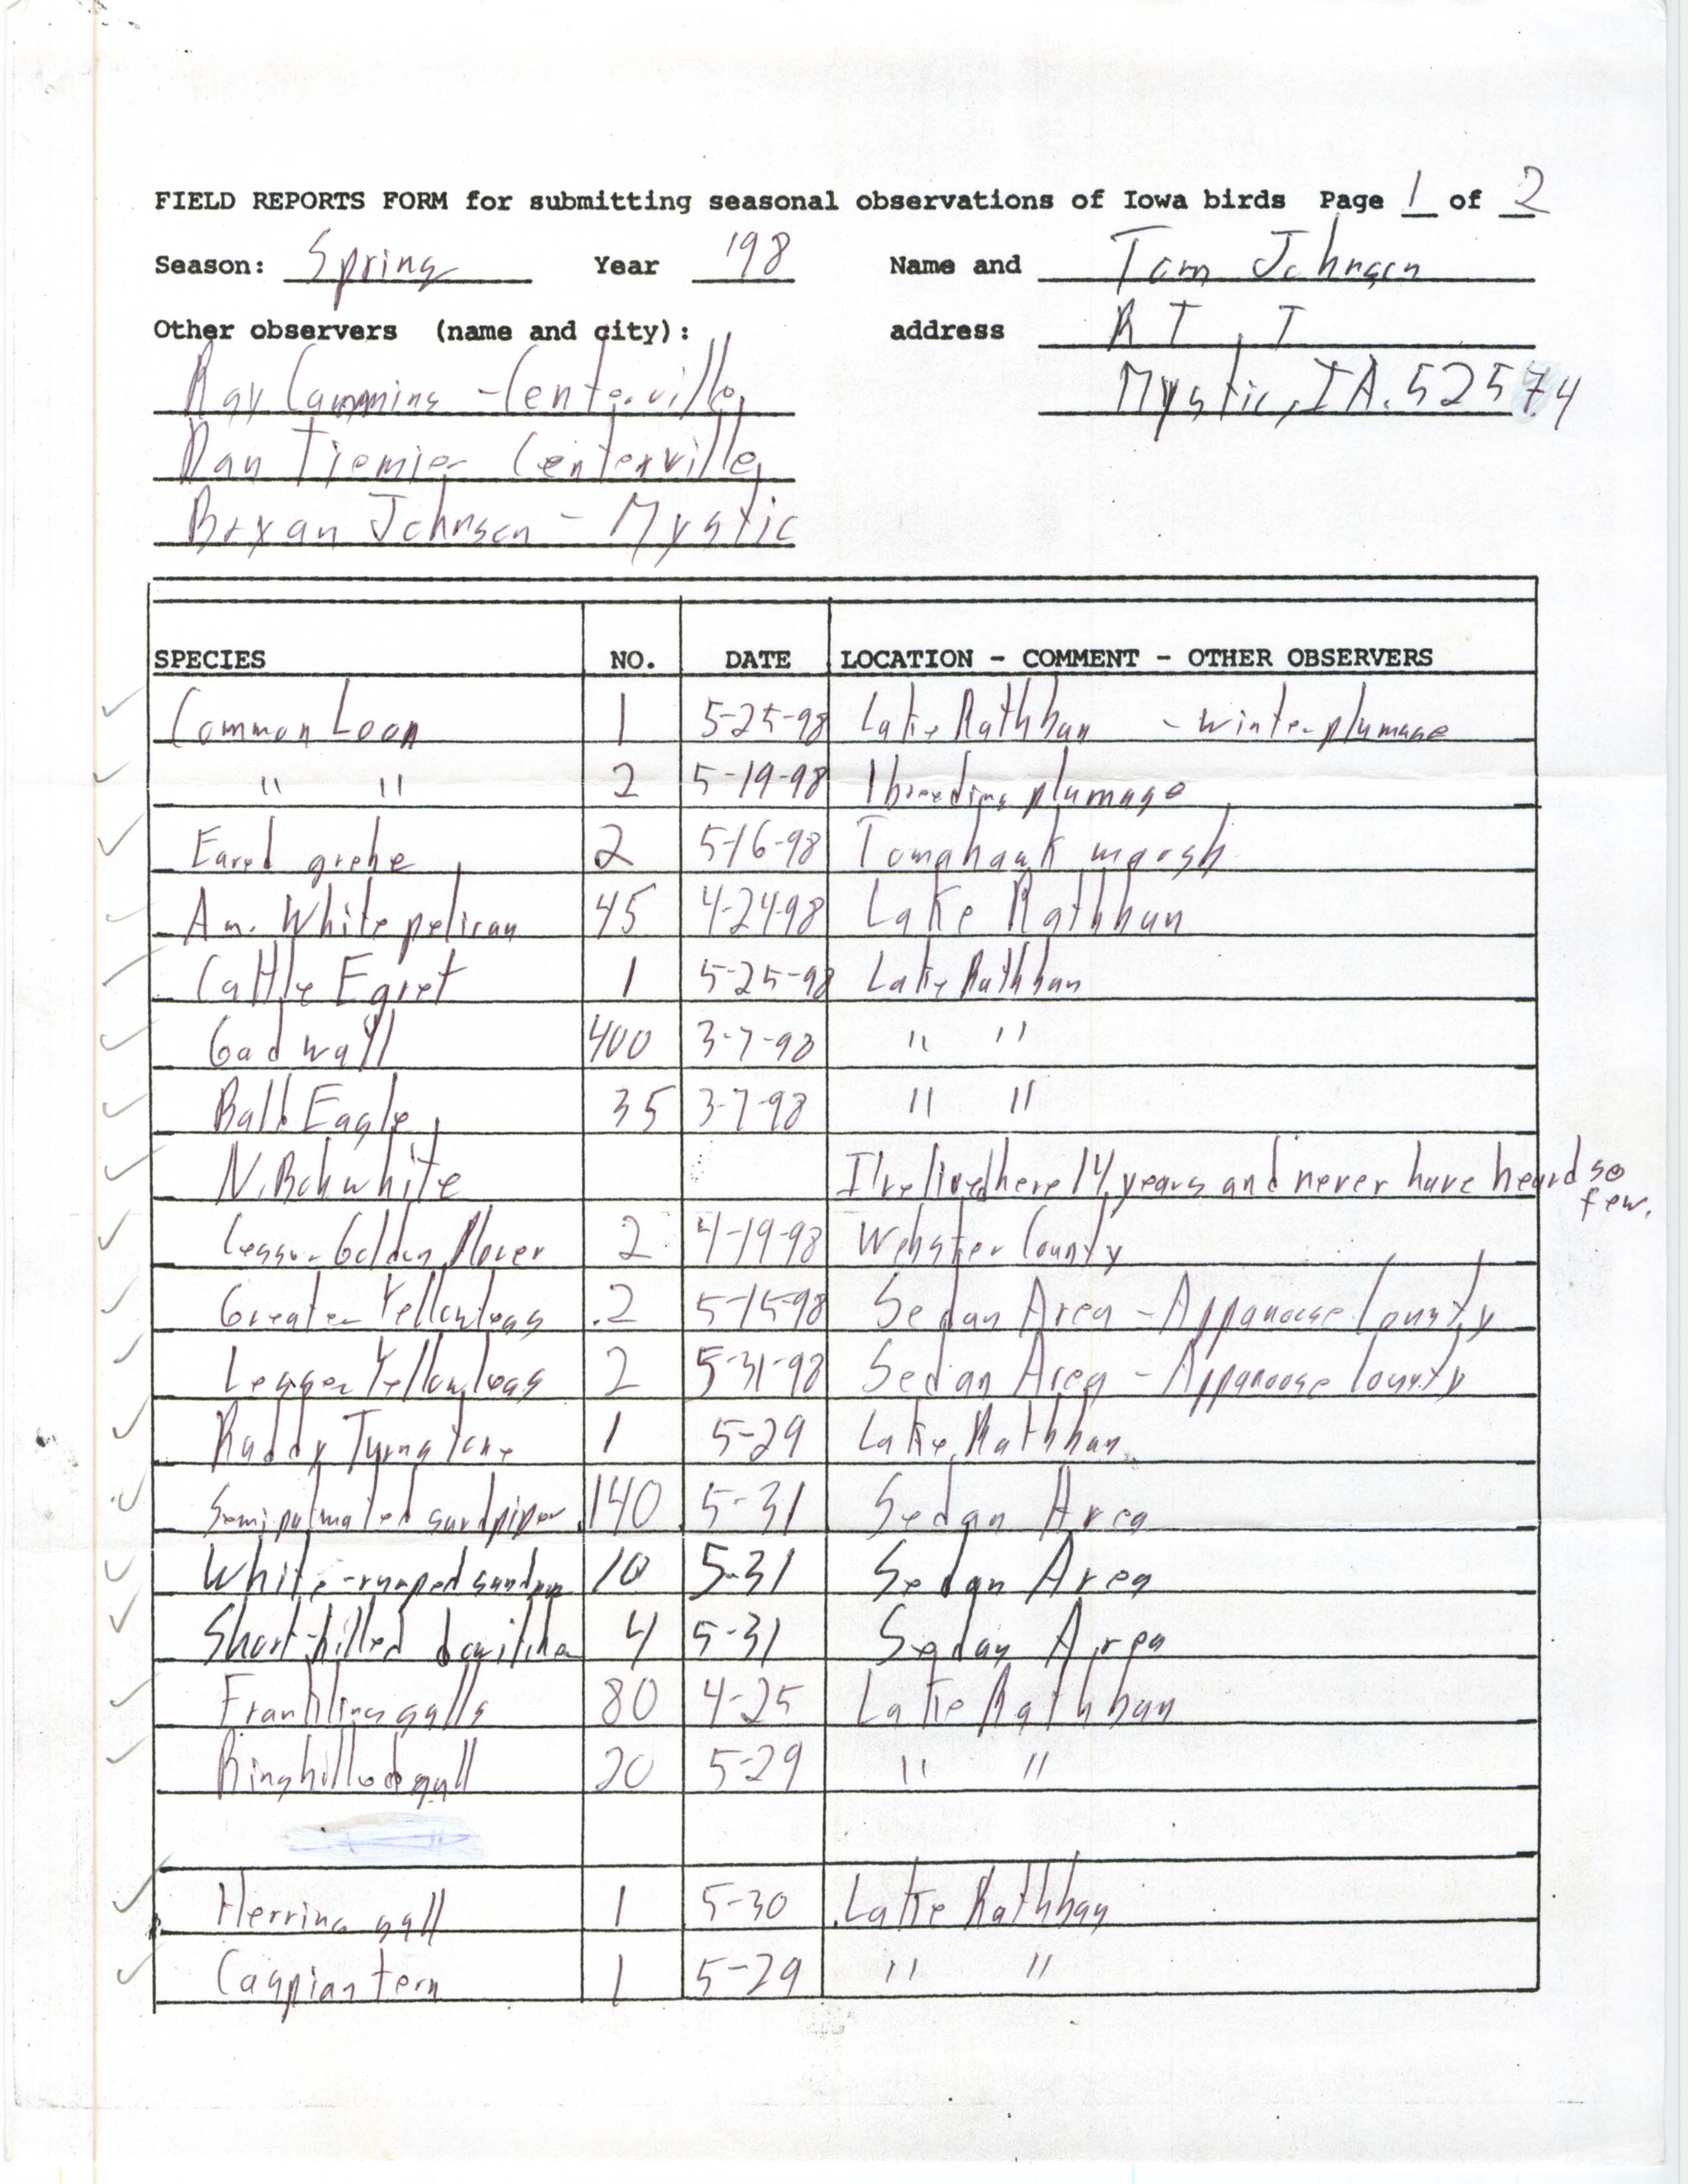 Field reports form for submitting seasonal observations of Iowa birds, Tom Johnson, spring 1998